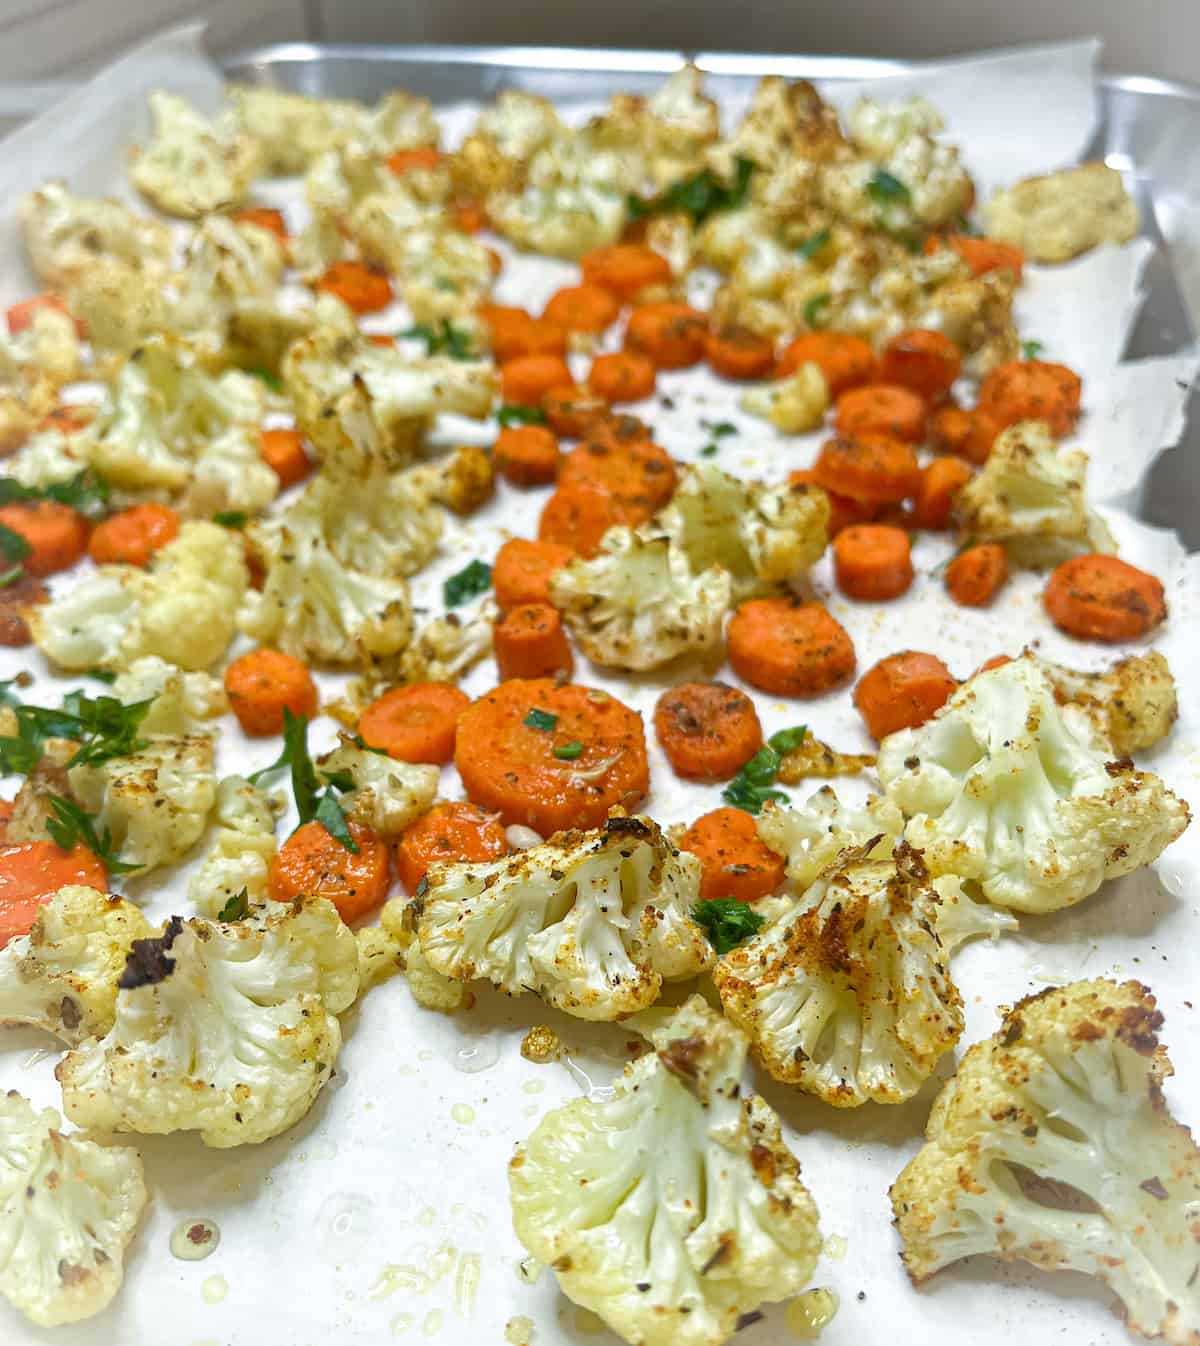 Roasted carrots and cauliflower on a baking sheet with green parsley on top